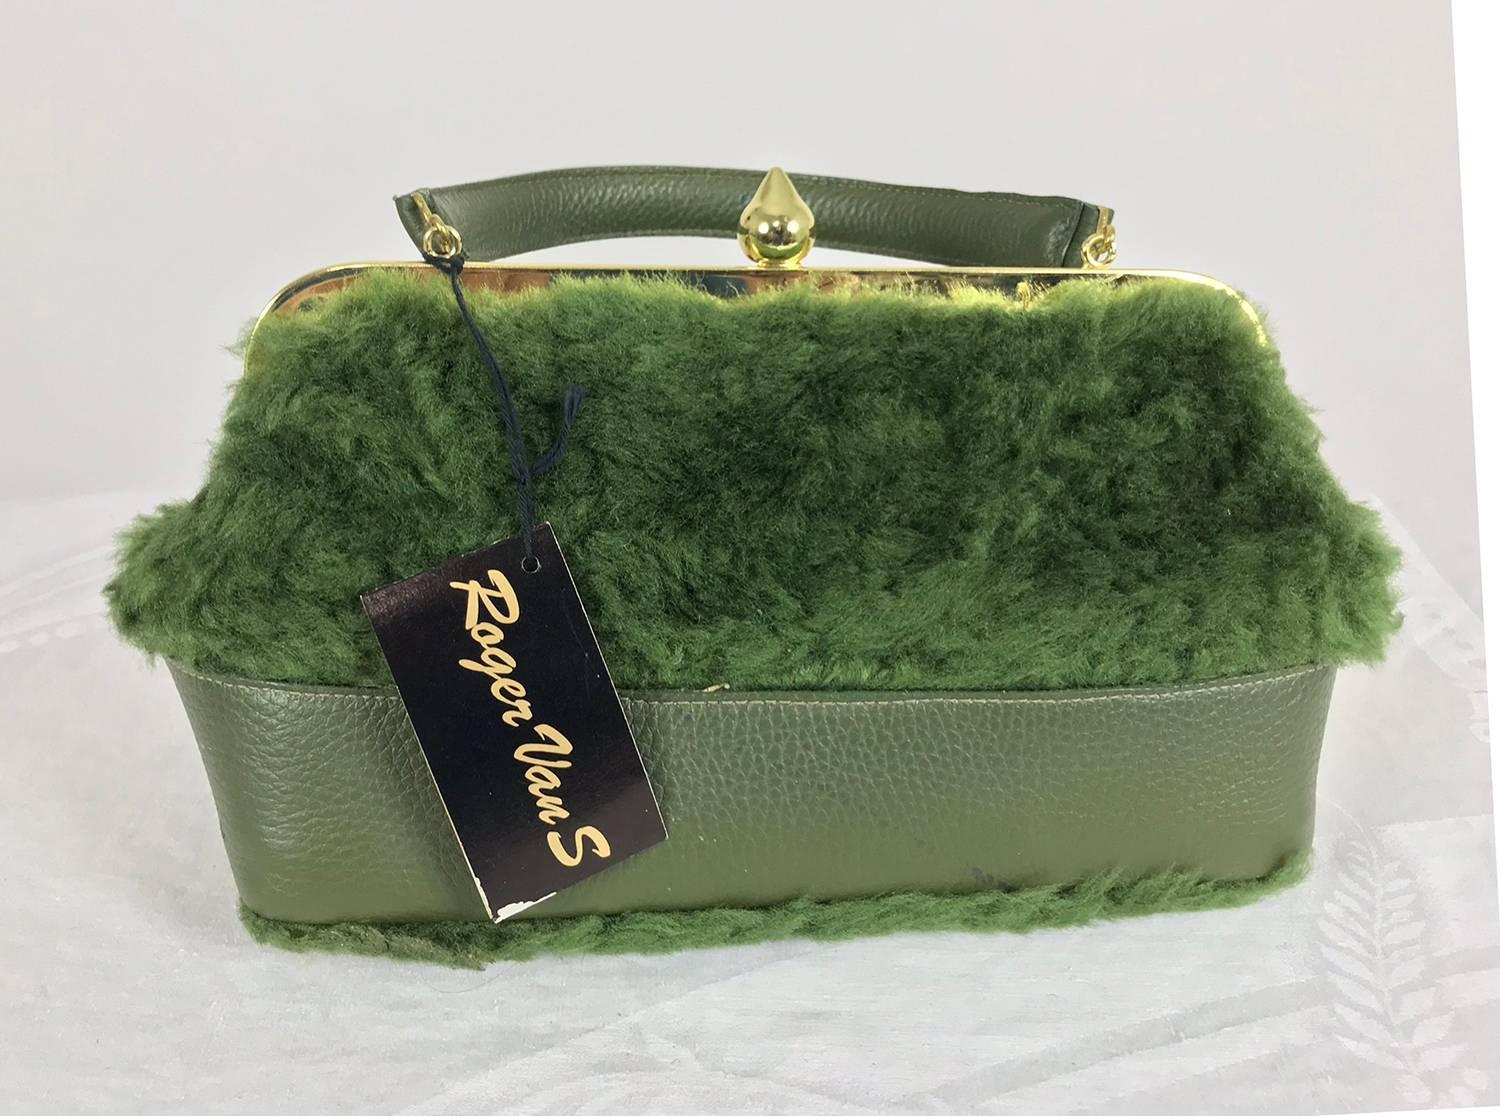 Roger Van S avocado green leather and faux fur handbag with gold hardware from the 1960s new with tags. 1940s and 50s fashion model Doris Bryn and husband Roger Van Shoyck began an accessories line after they met at the University of Cincinnati. The